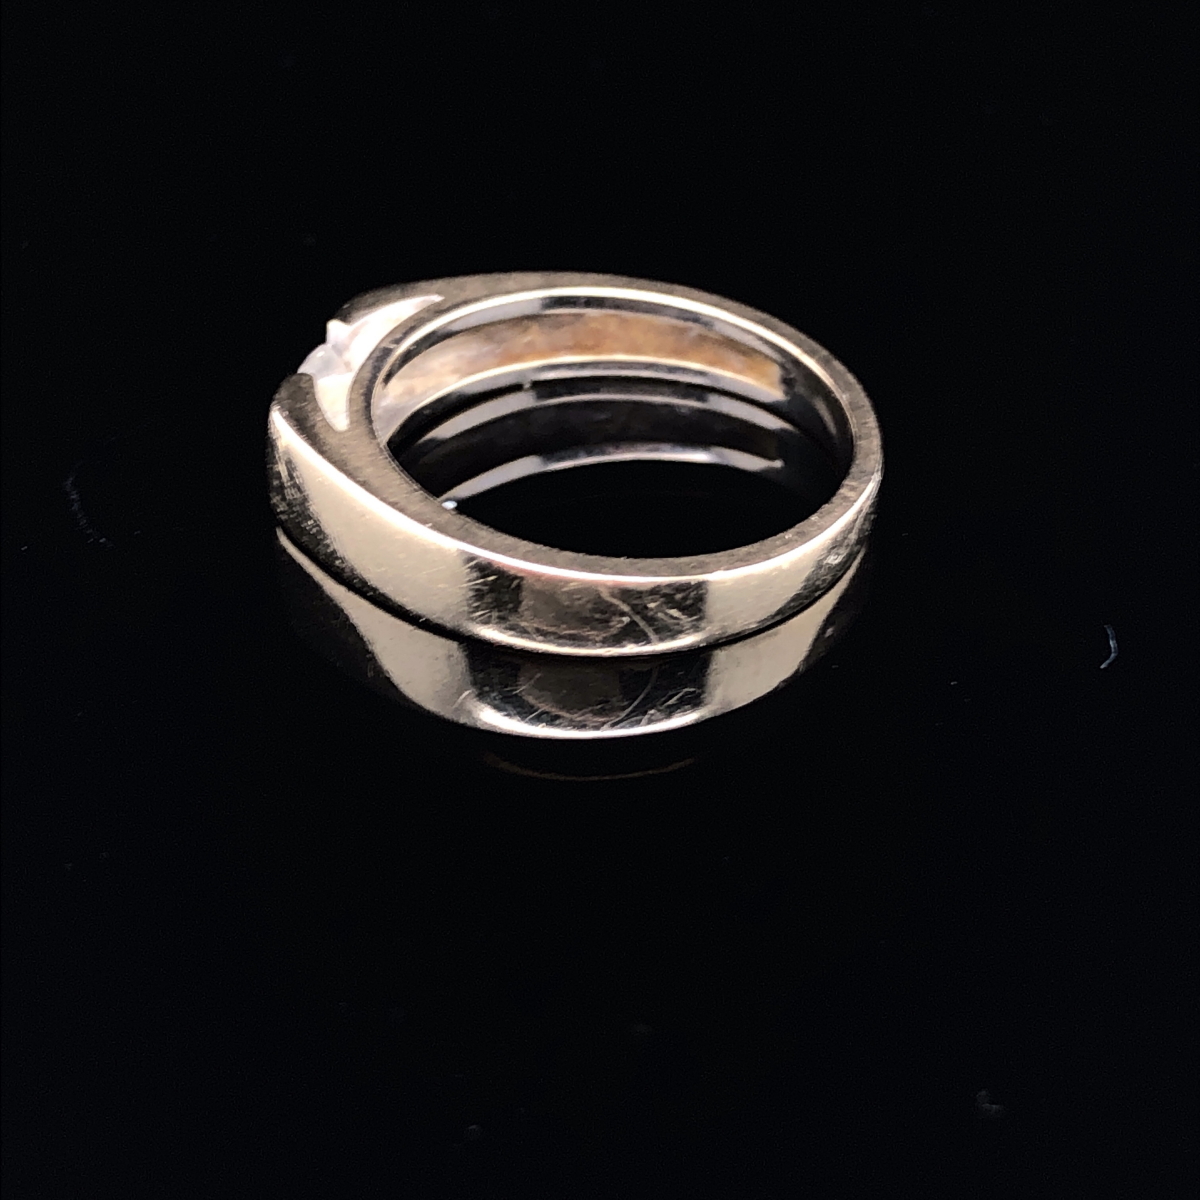 AN UNHALLMARKED 18ct GOLD AND DIAMOND RING. THE CENTRAL DIAMOND APPROX. ESTIMATED WEIGHT 0.28ct, - Image 2 of 3